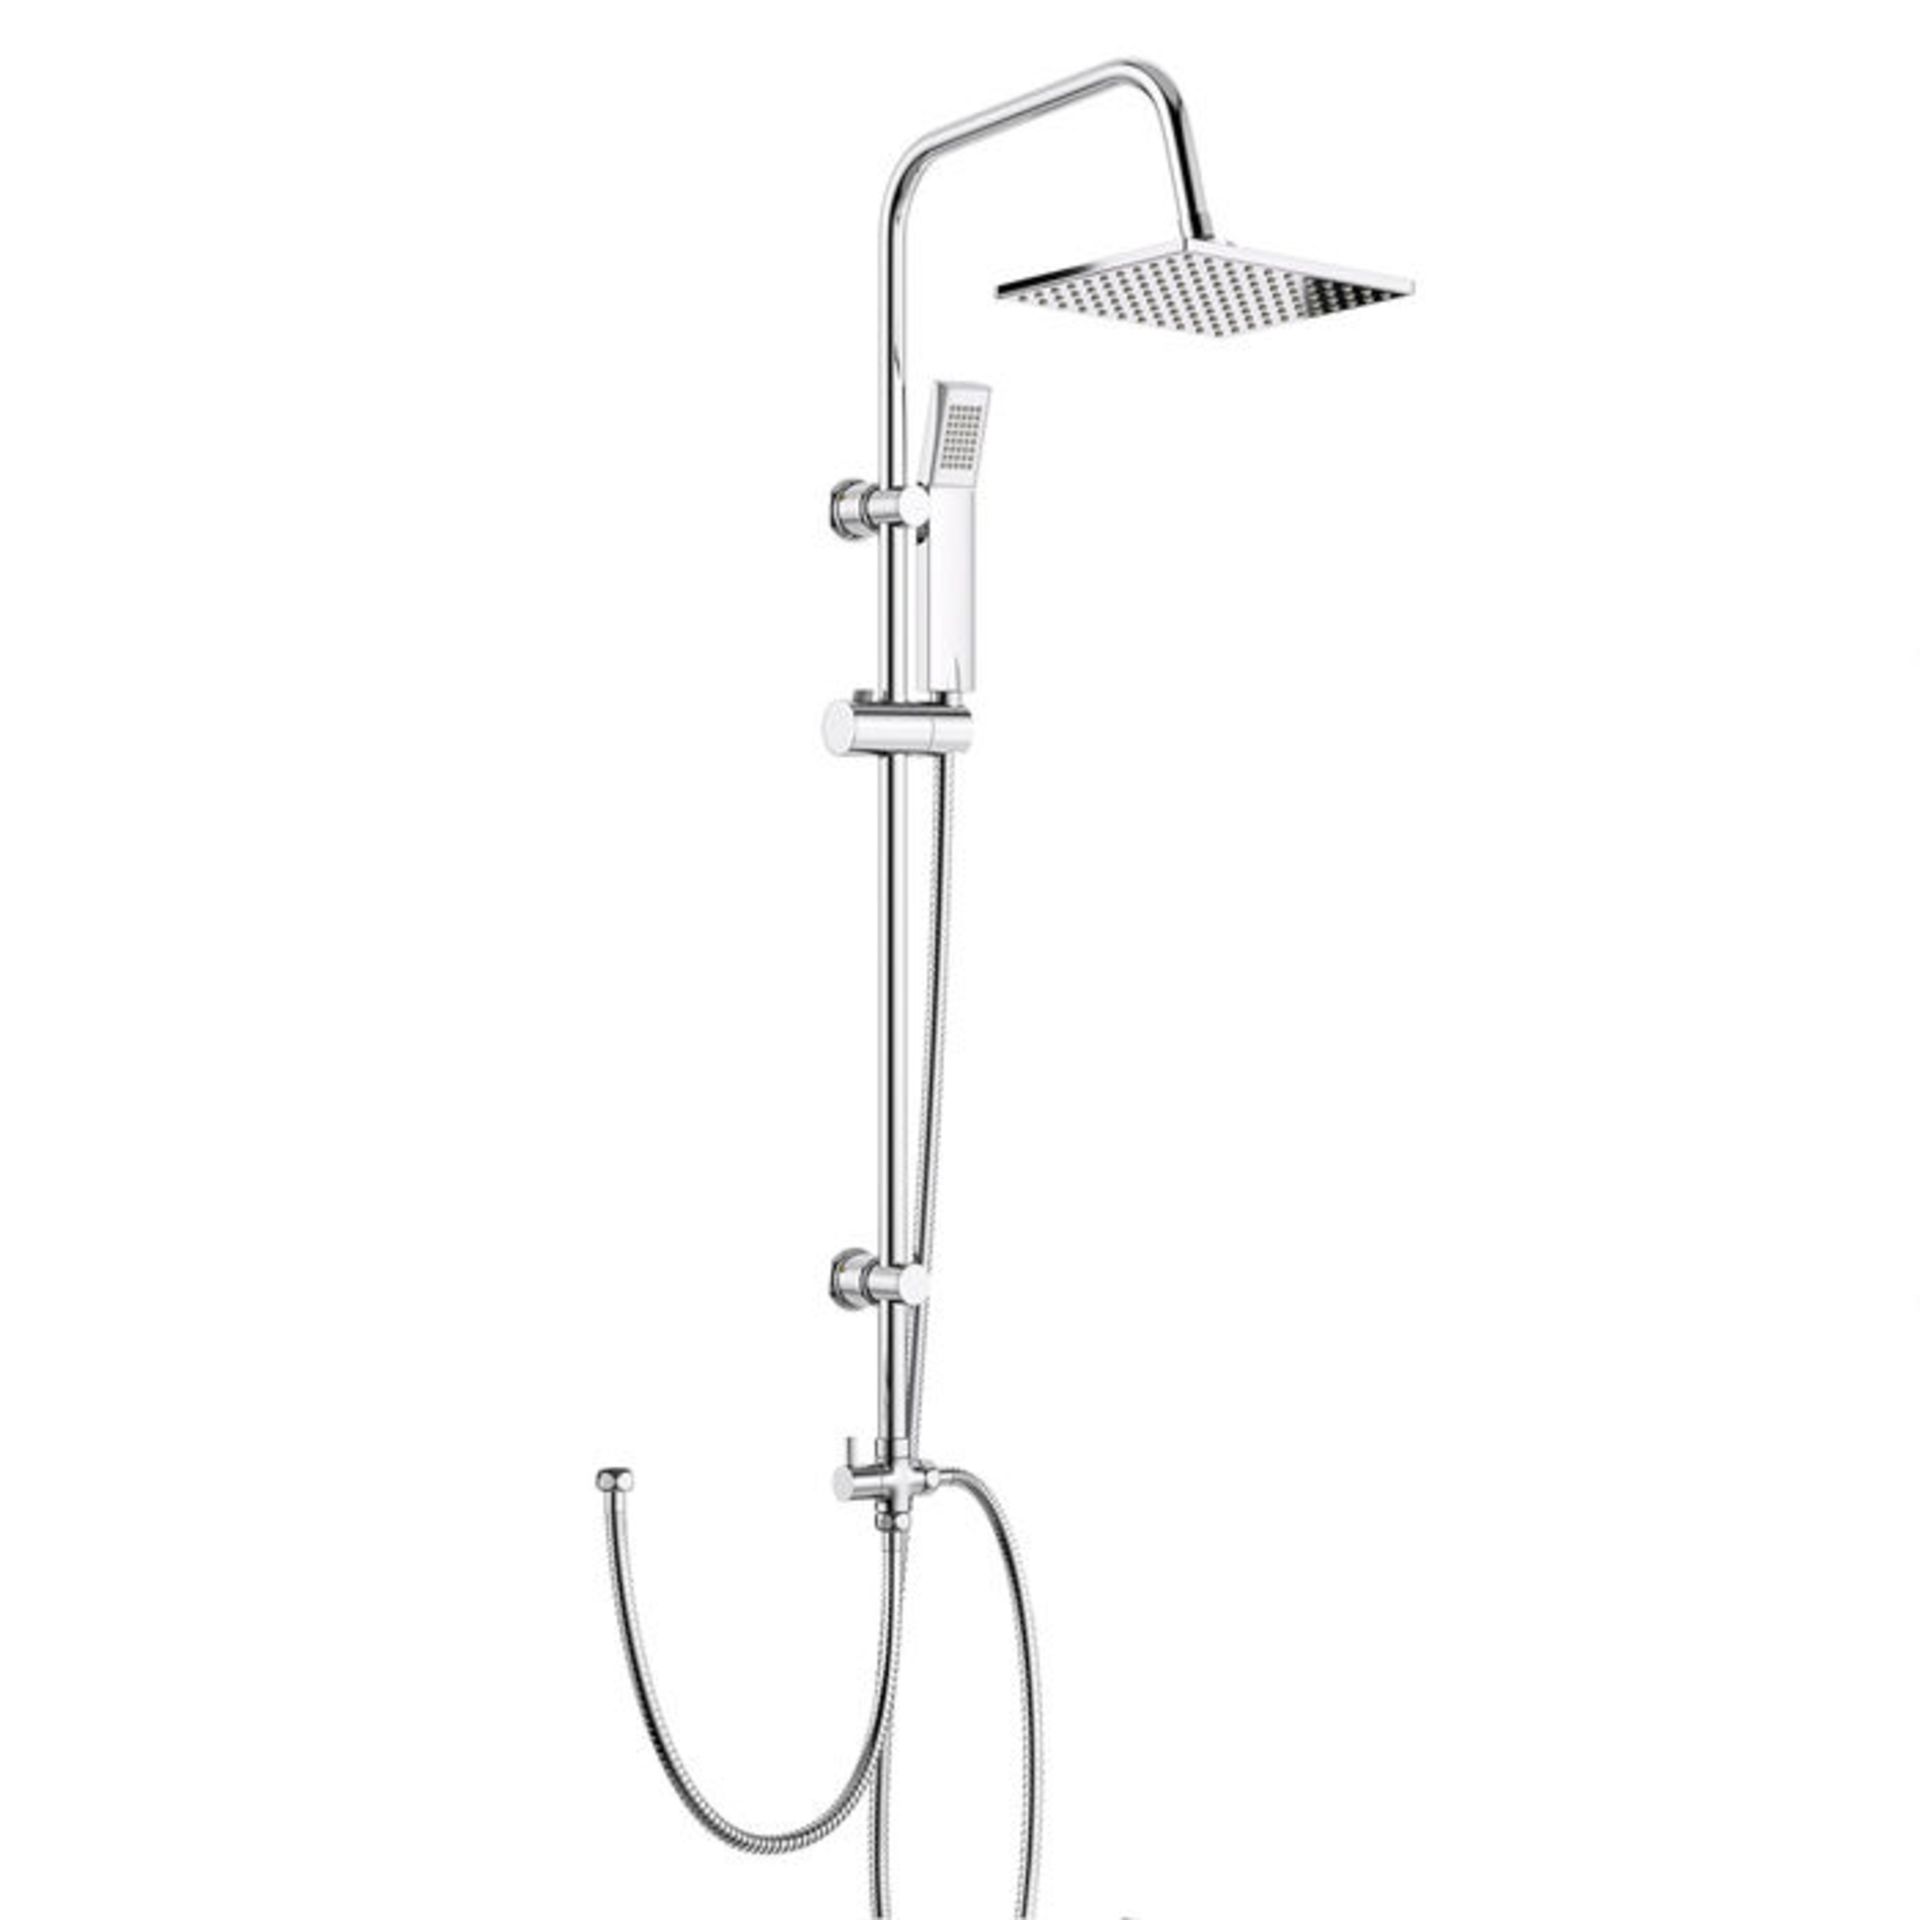 (AH100) 200mm Square Head, Riser Rail Handheld Kit. Quality stainless steel shower head with Easy - Image 2 of 2